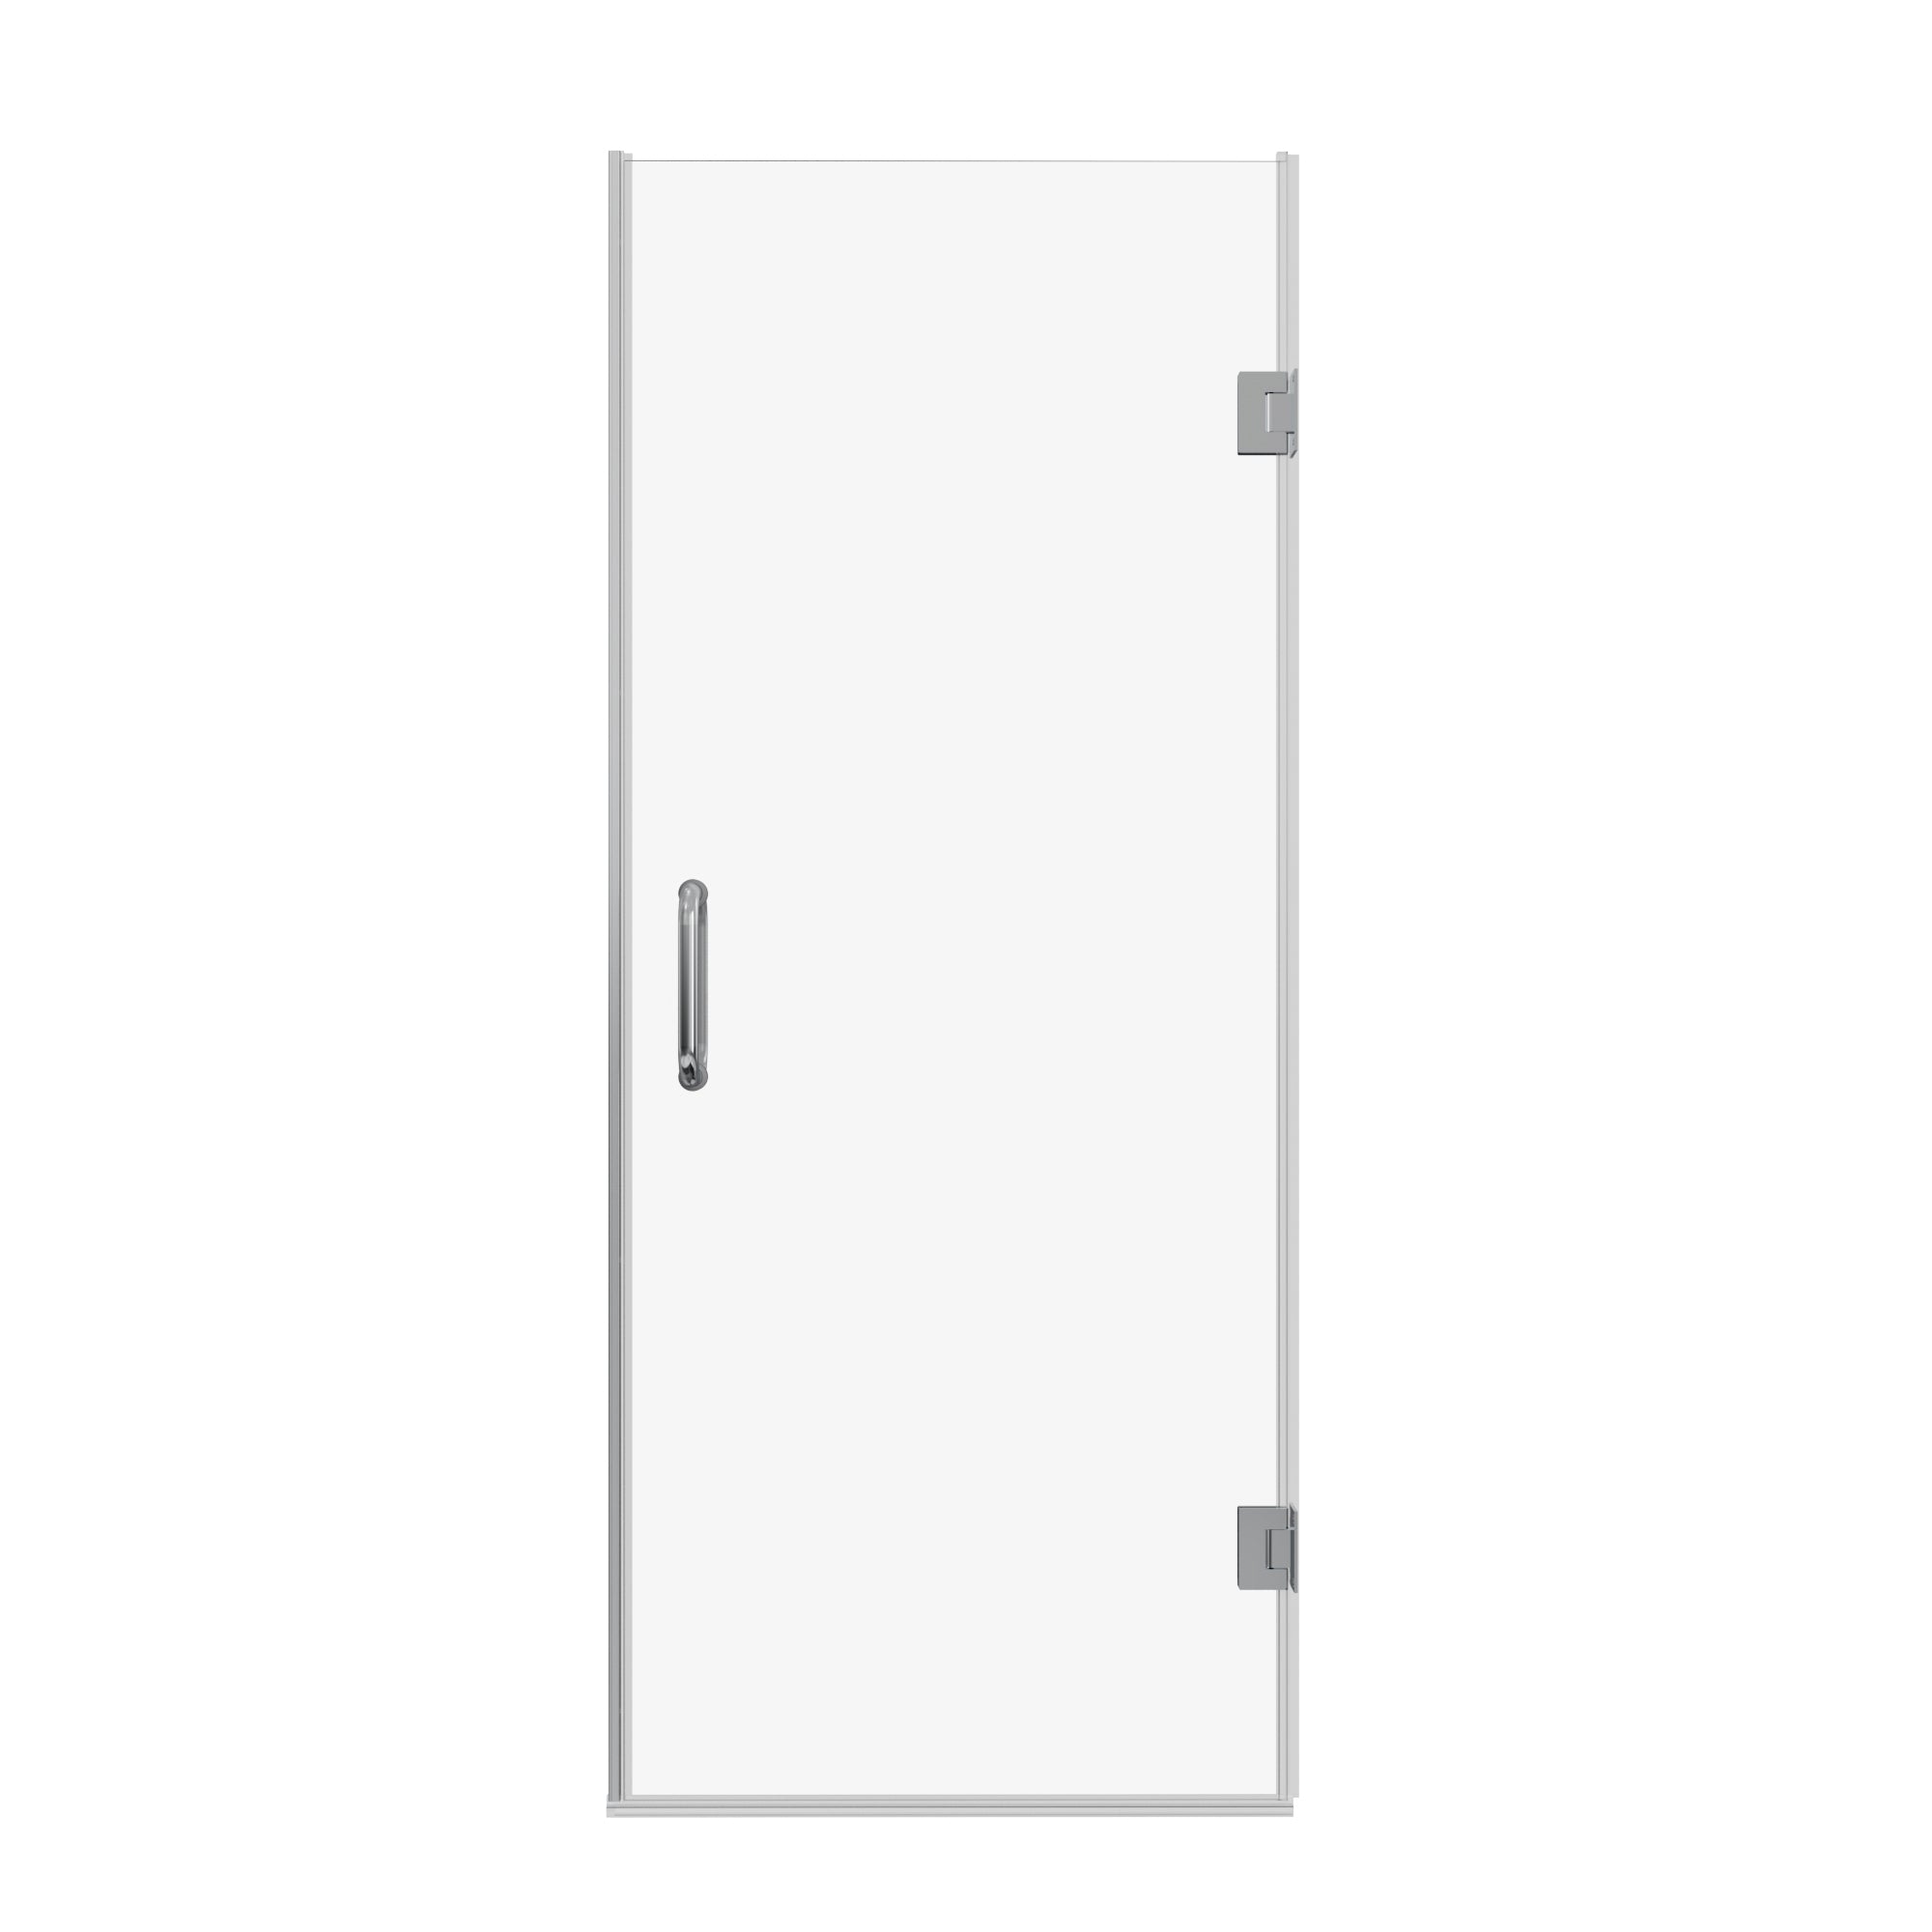 28'' W x 72'' H Frameless Shower Door in Chrome with Clear Glass